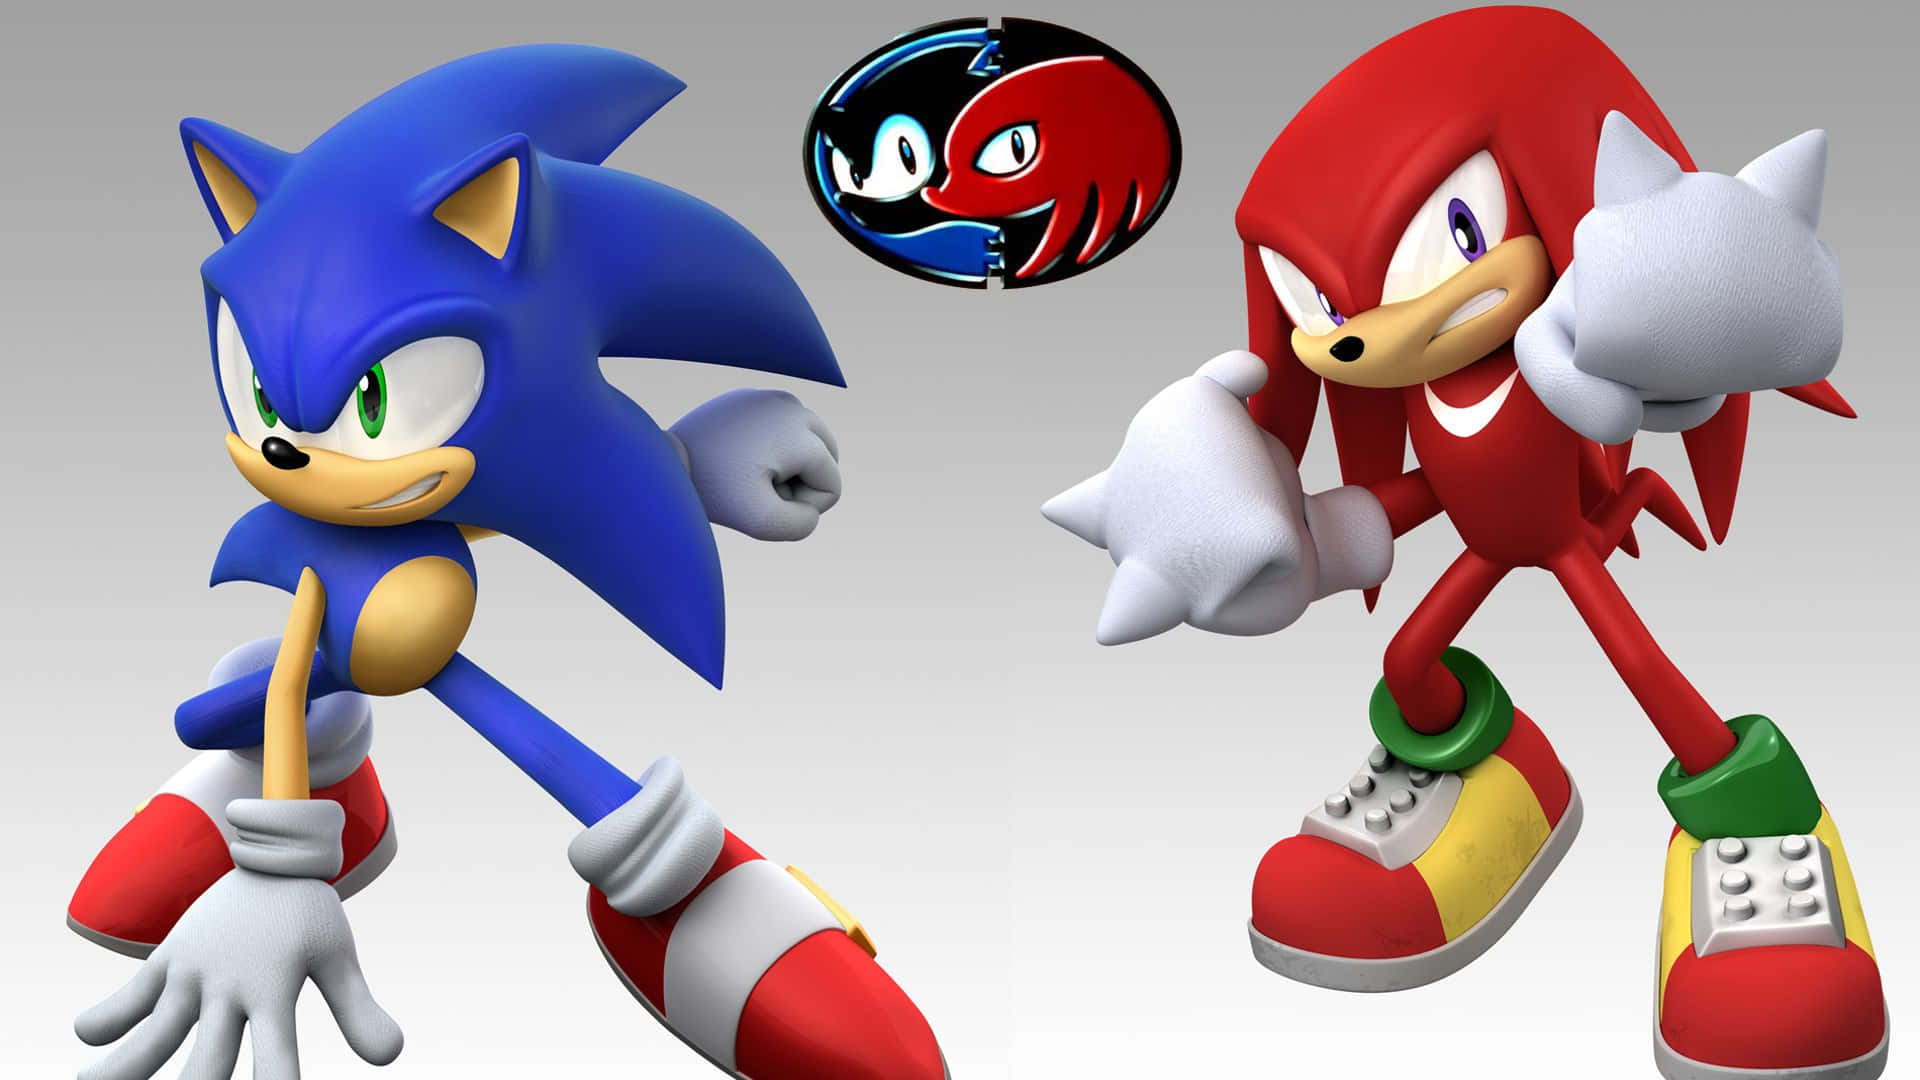 Knuckles From Sonic The Hedgehog Fame Background